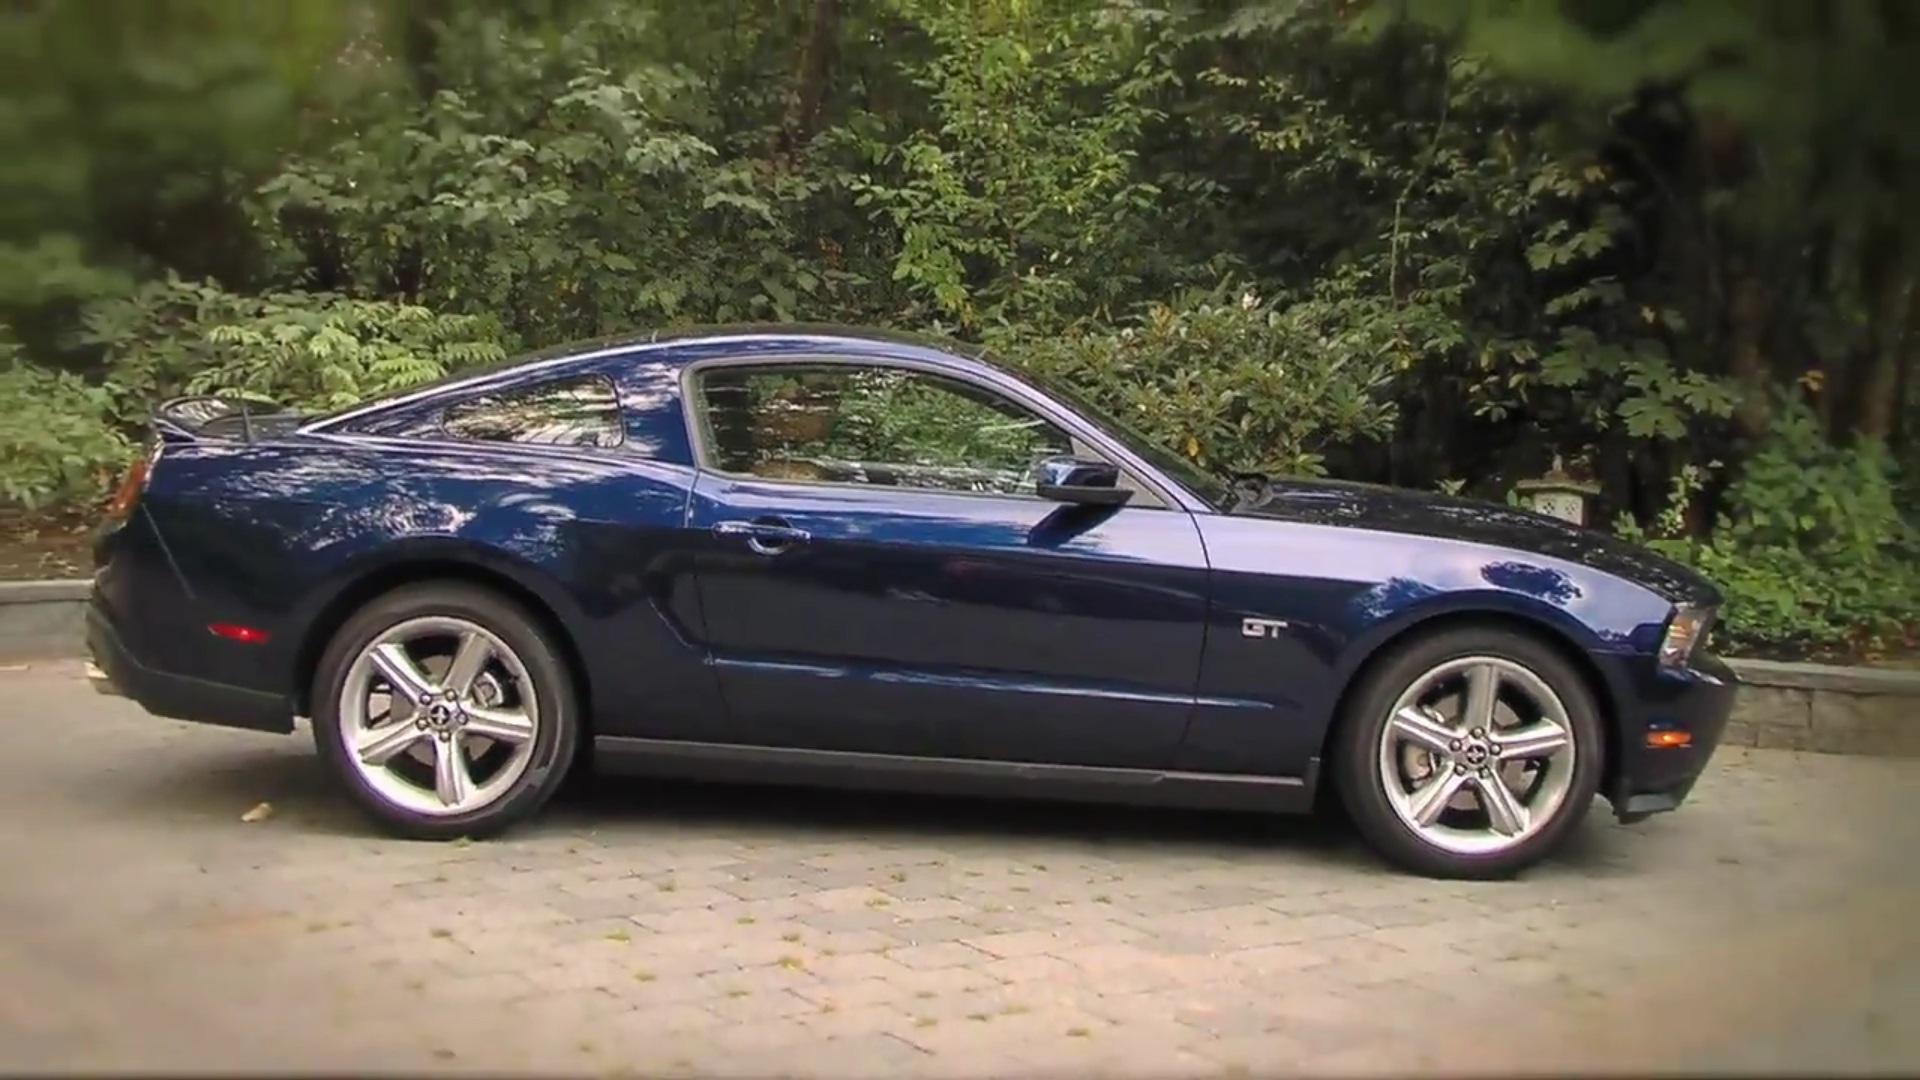 Video: 2010 Ford Mustang GT Review